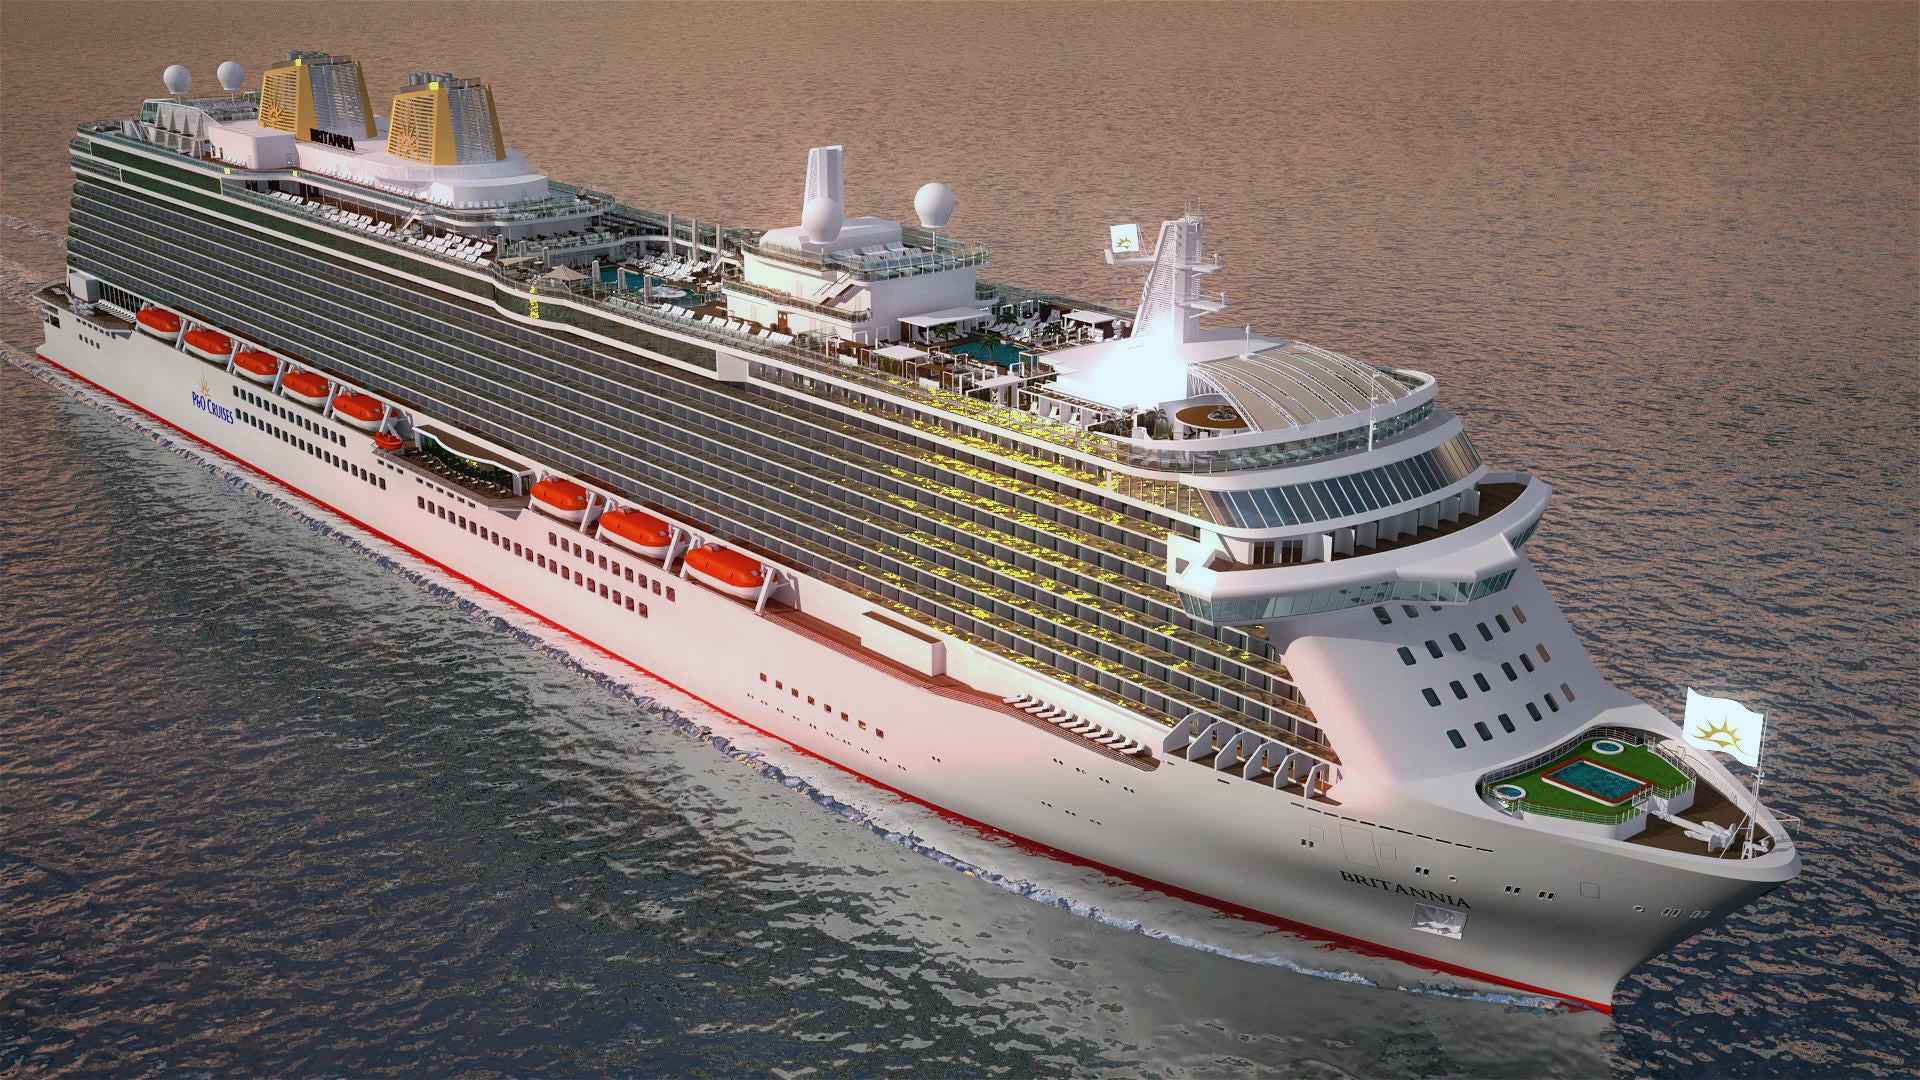 At 1,082ft long, the €559m Brittania is only 20ft shorter than the world's largest cruise ships